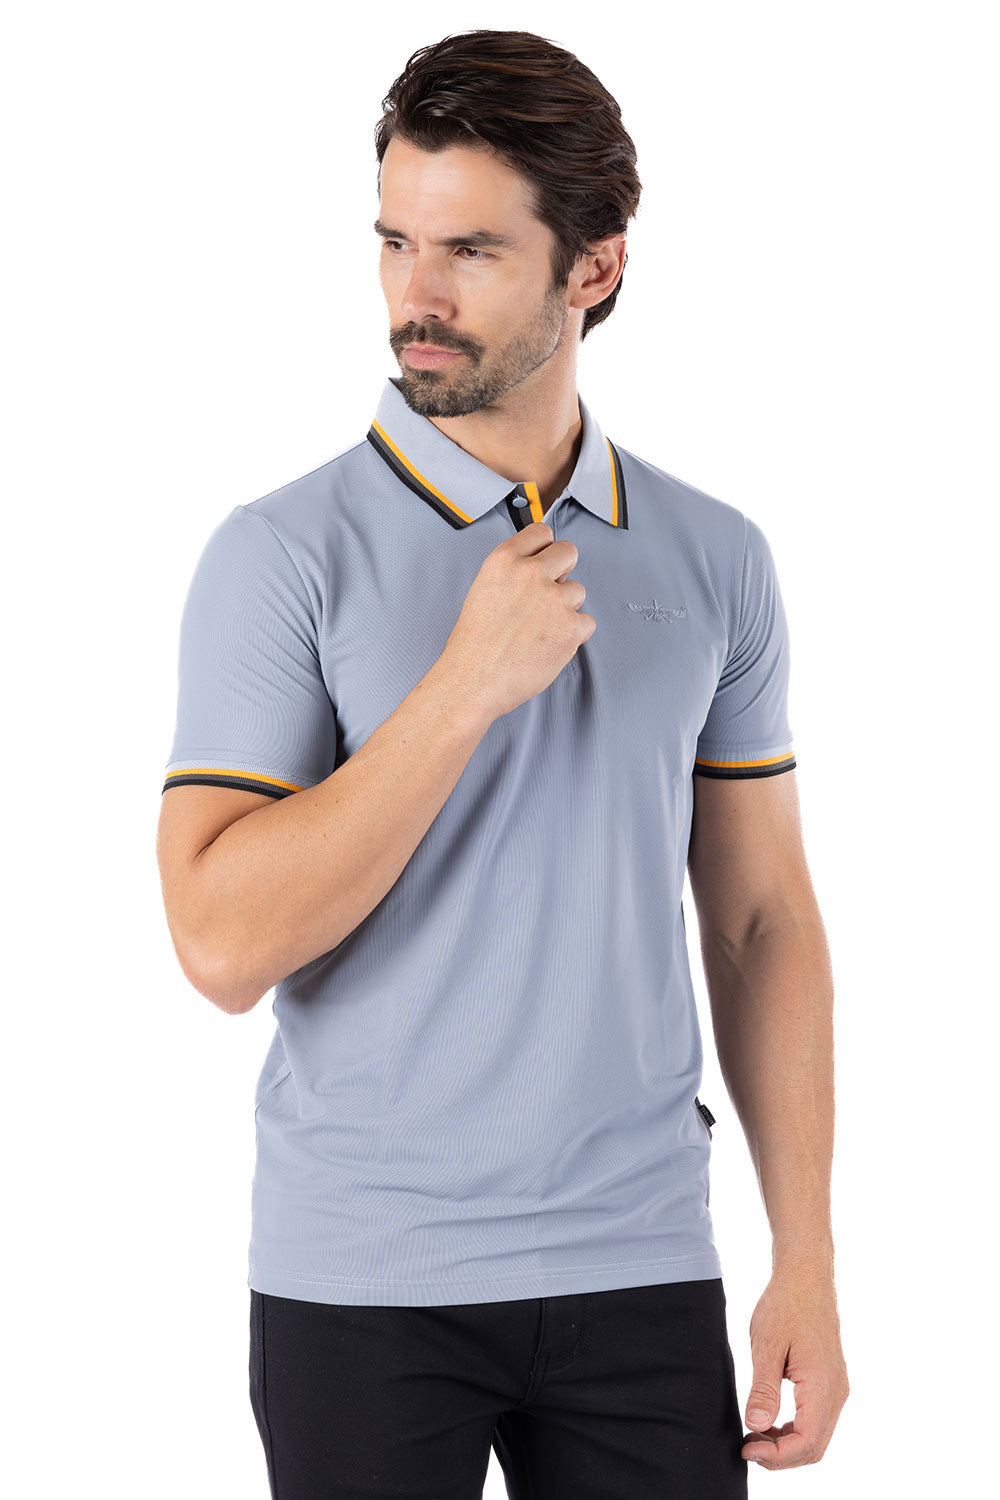 Barabas Men's Solid Color Linear Collar and Cuff Polo Shirts 3PS127 Light Grey